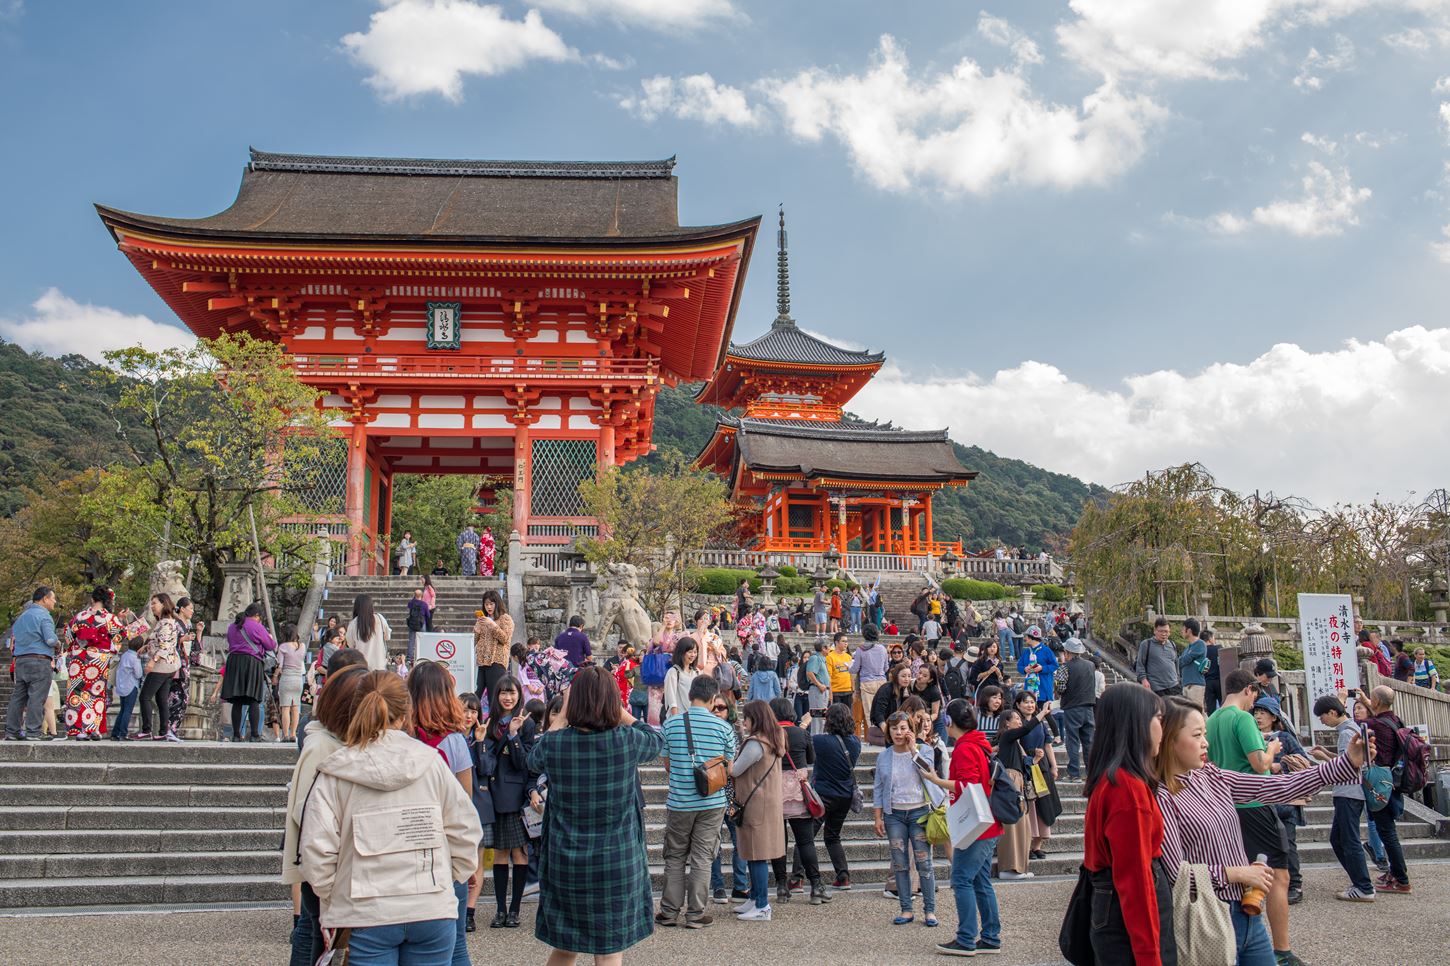 Sightseeing scenery that simply shows the weather in Kyoto in October3